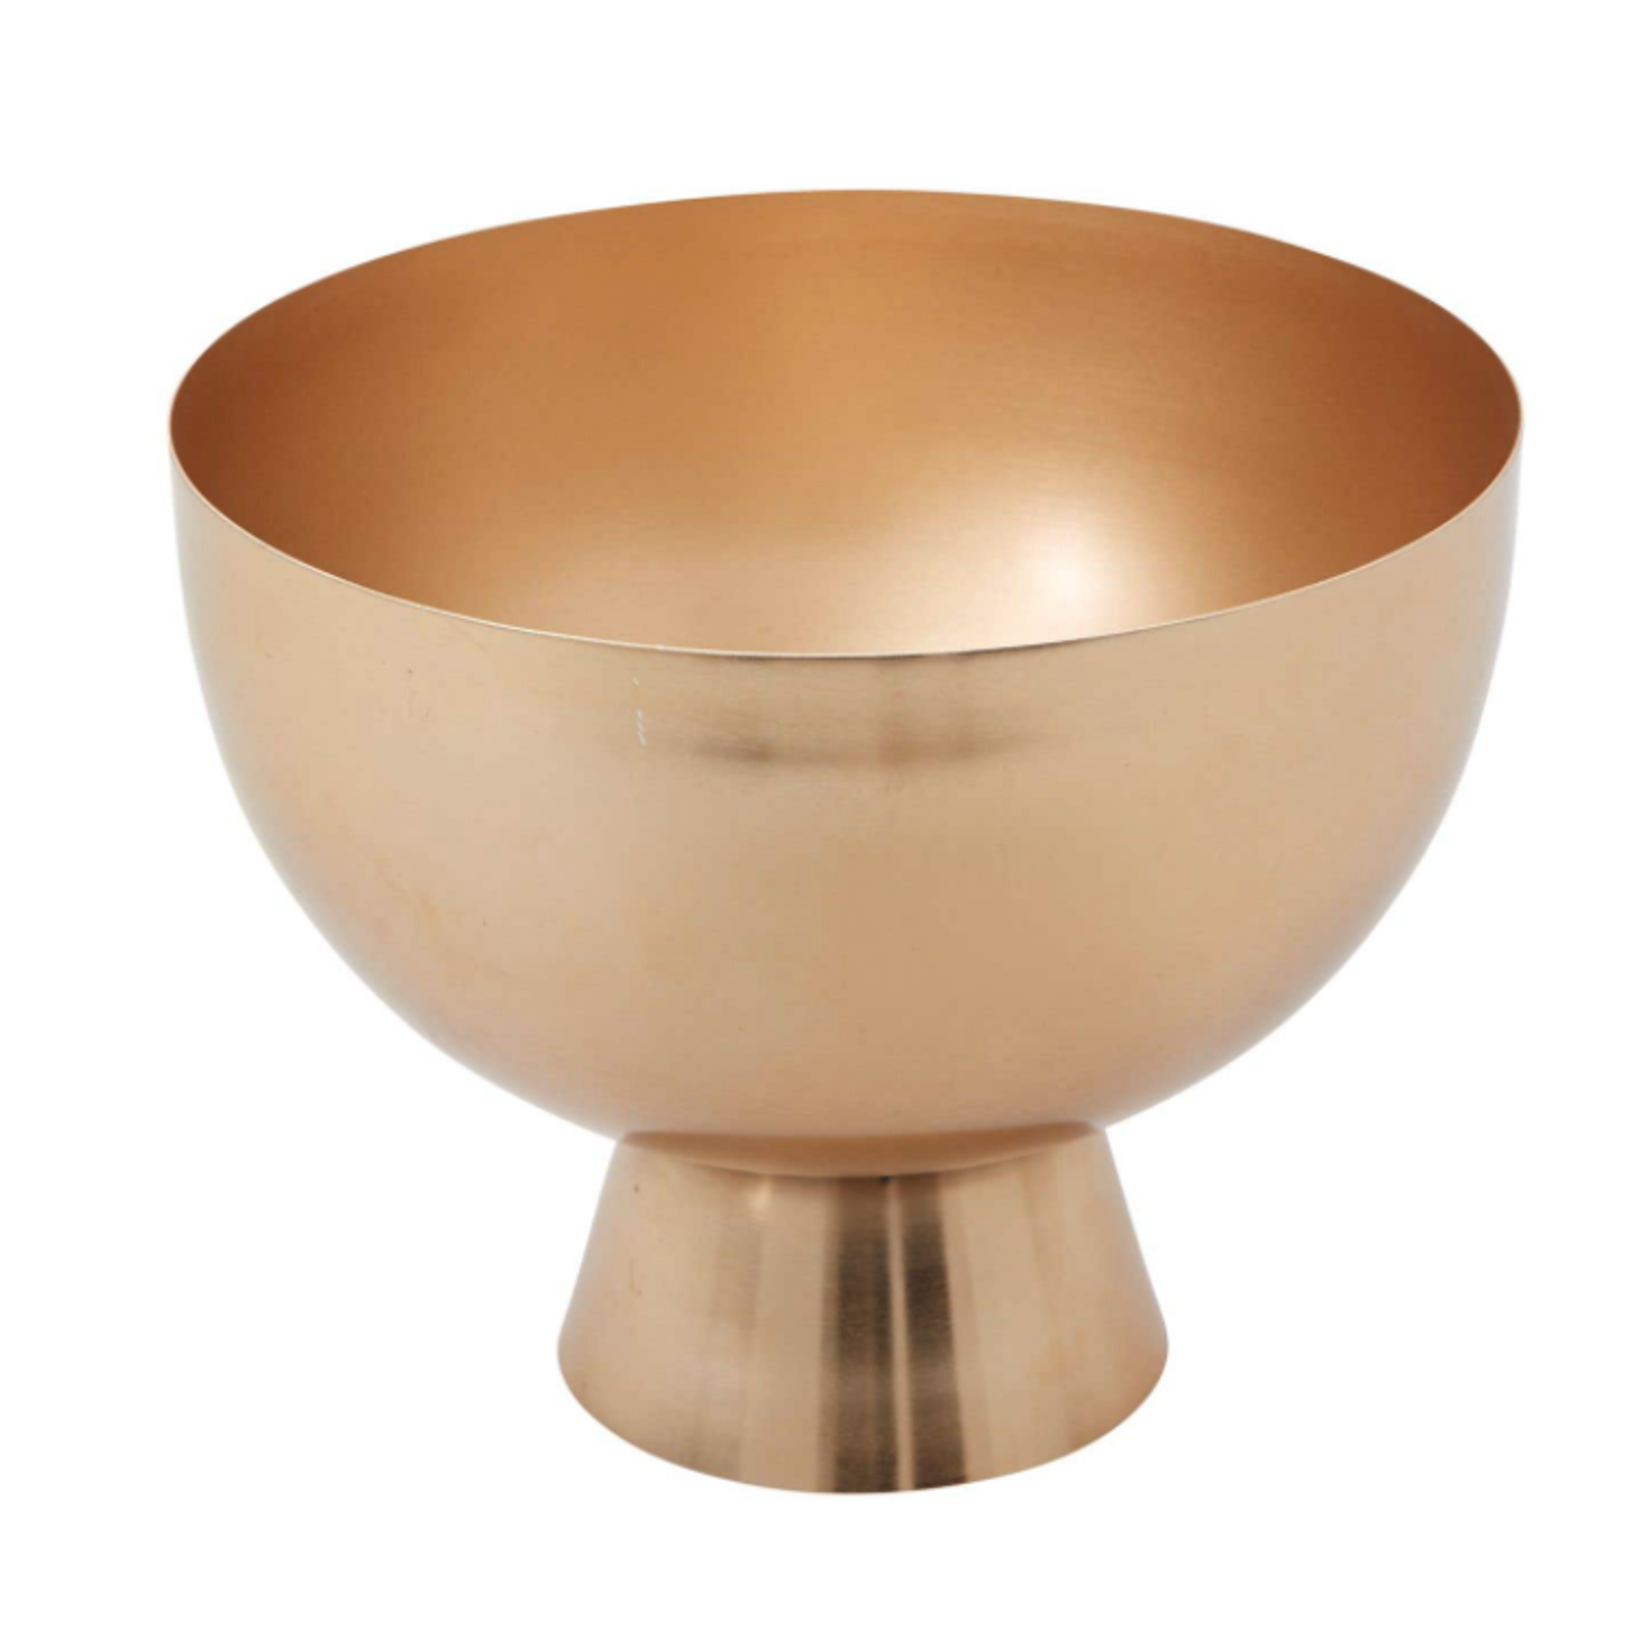 5”H X 6.75” GOLD METAL GOLDEN LOVE COMPOTE